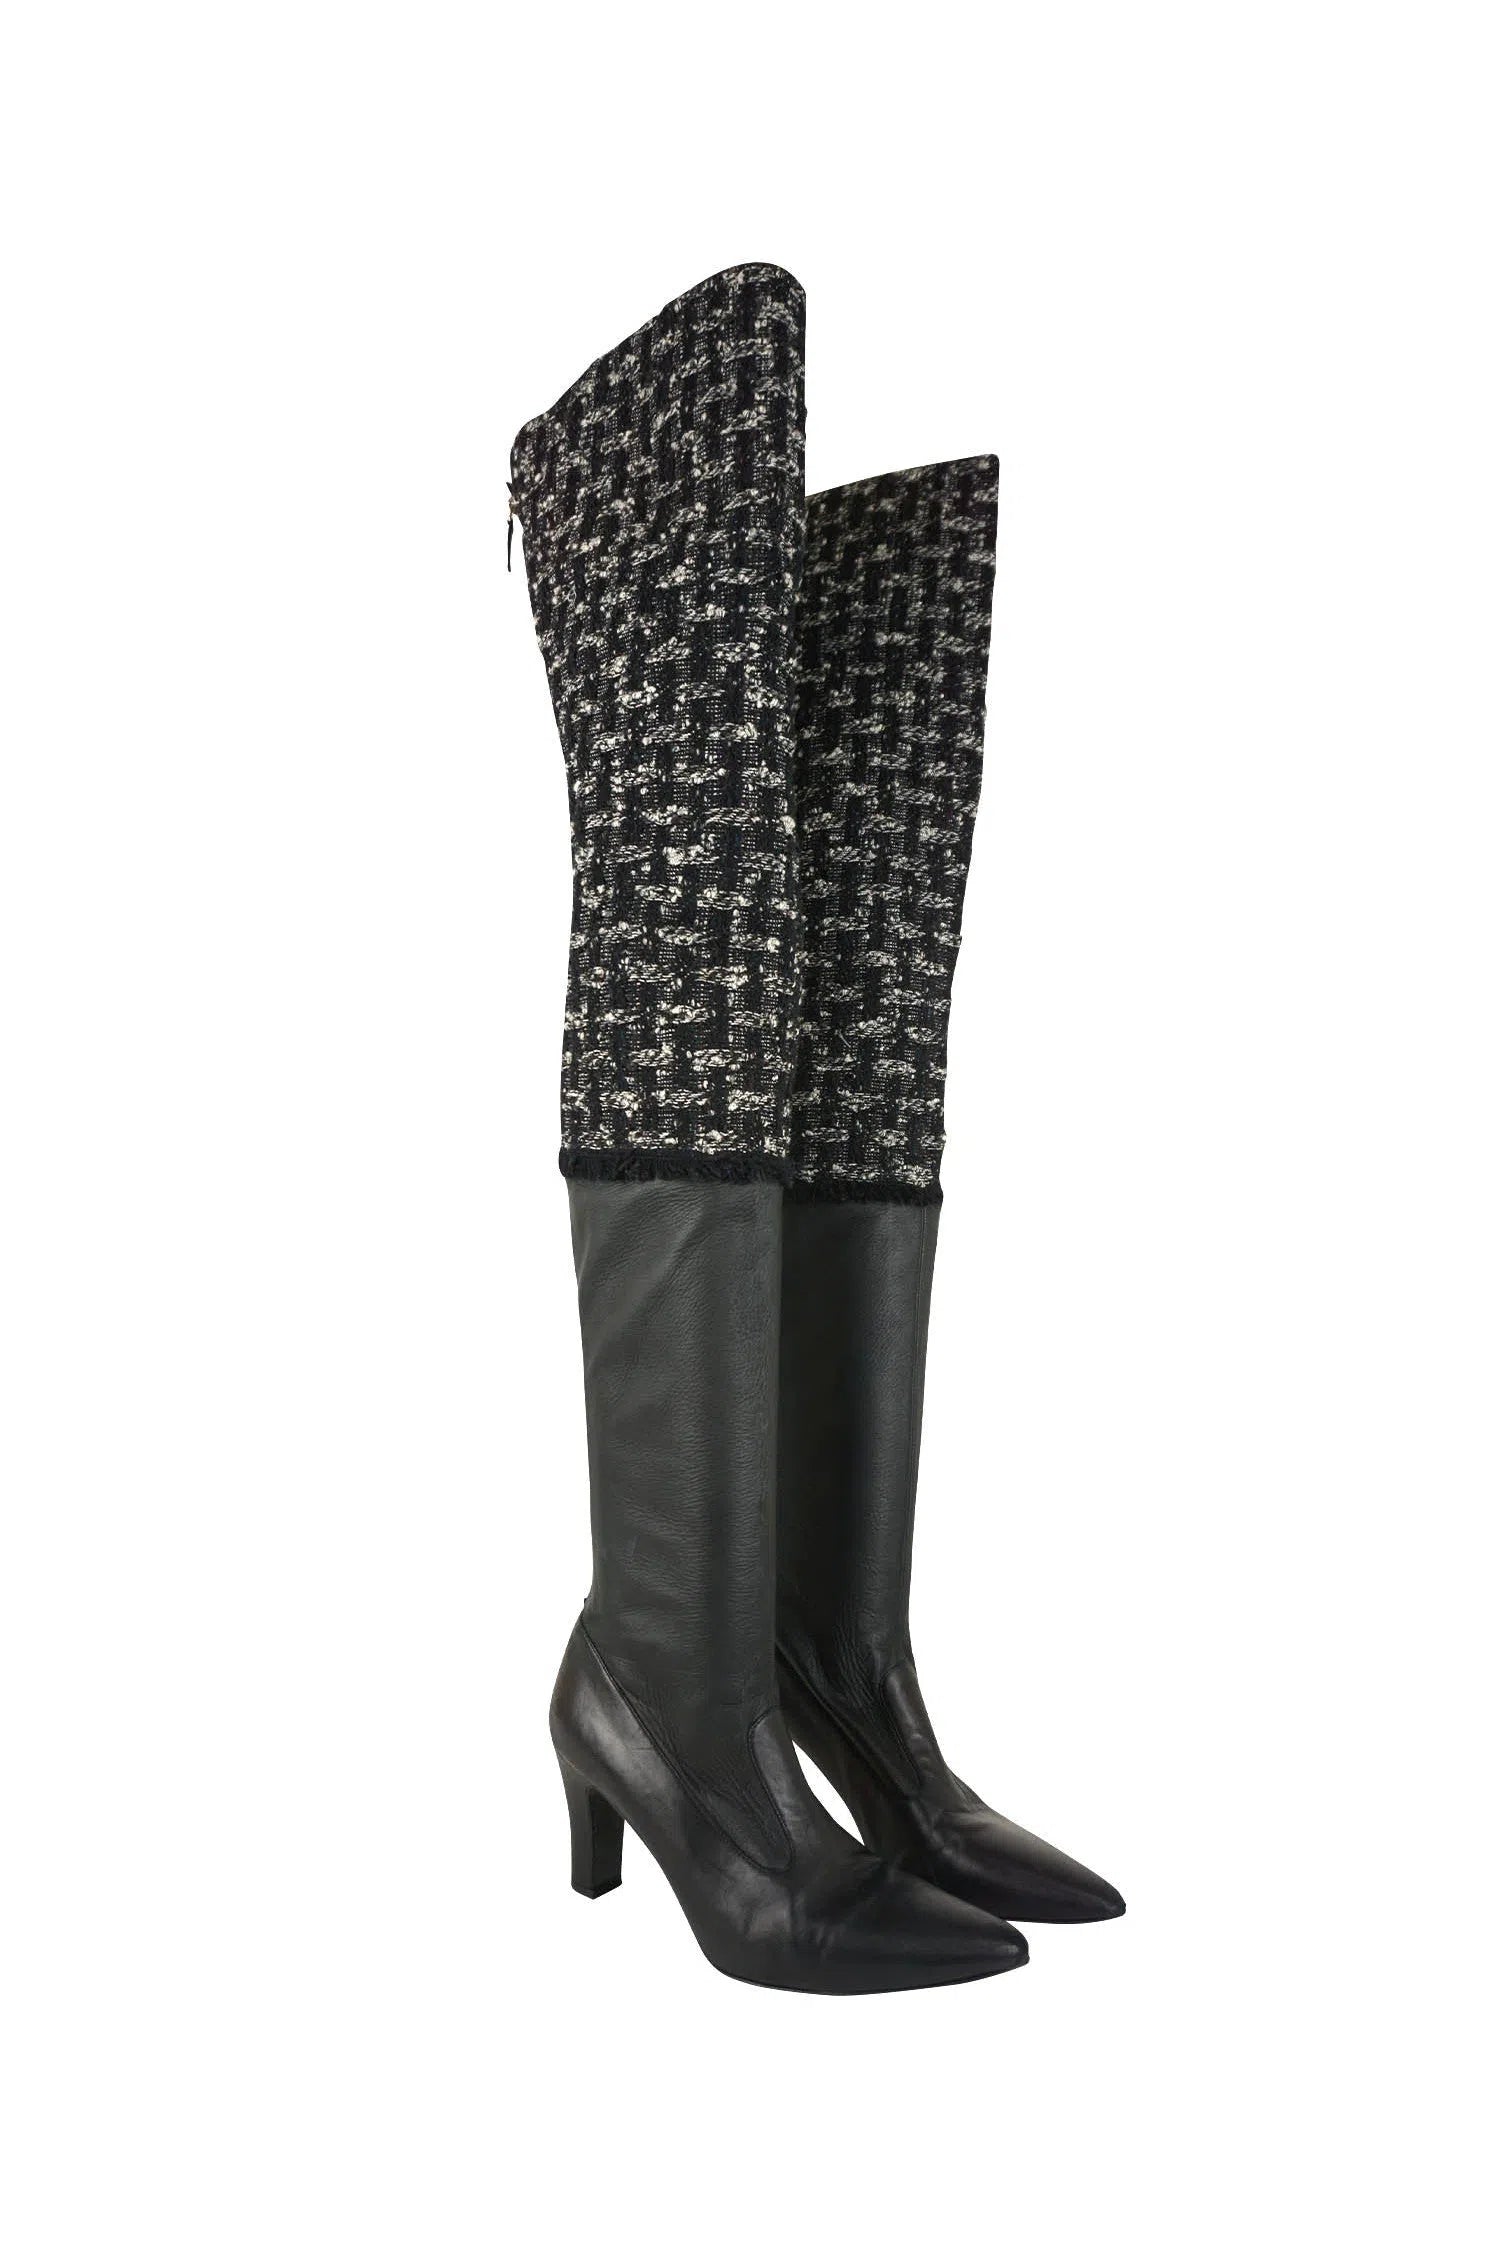 Chanel Calfskin Leather and Tweed Over the Knee Boots